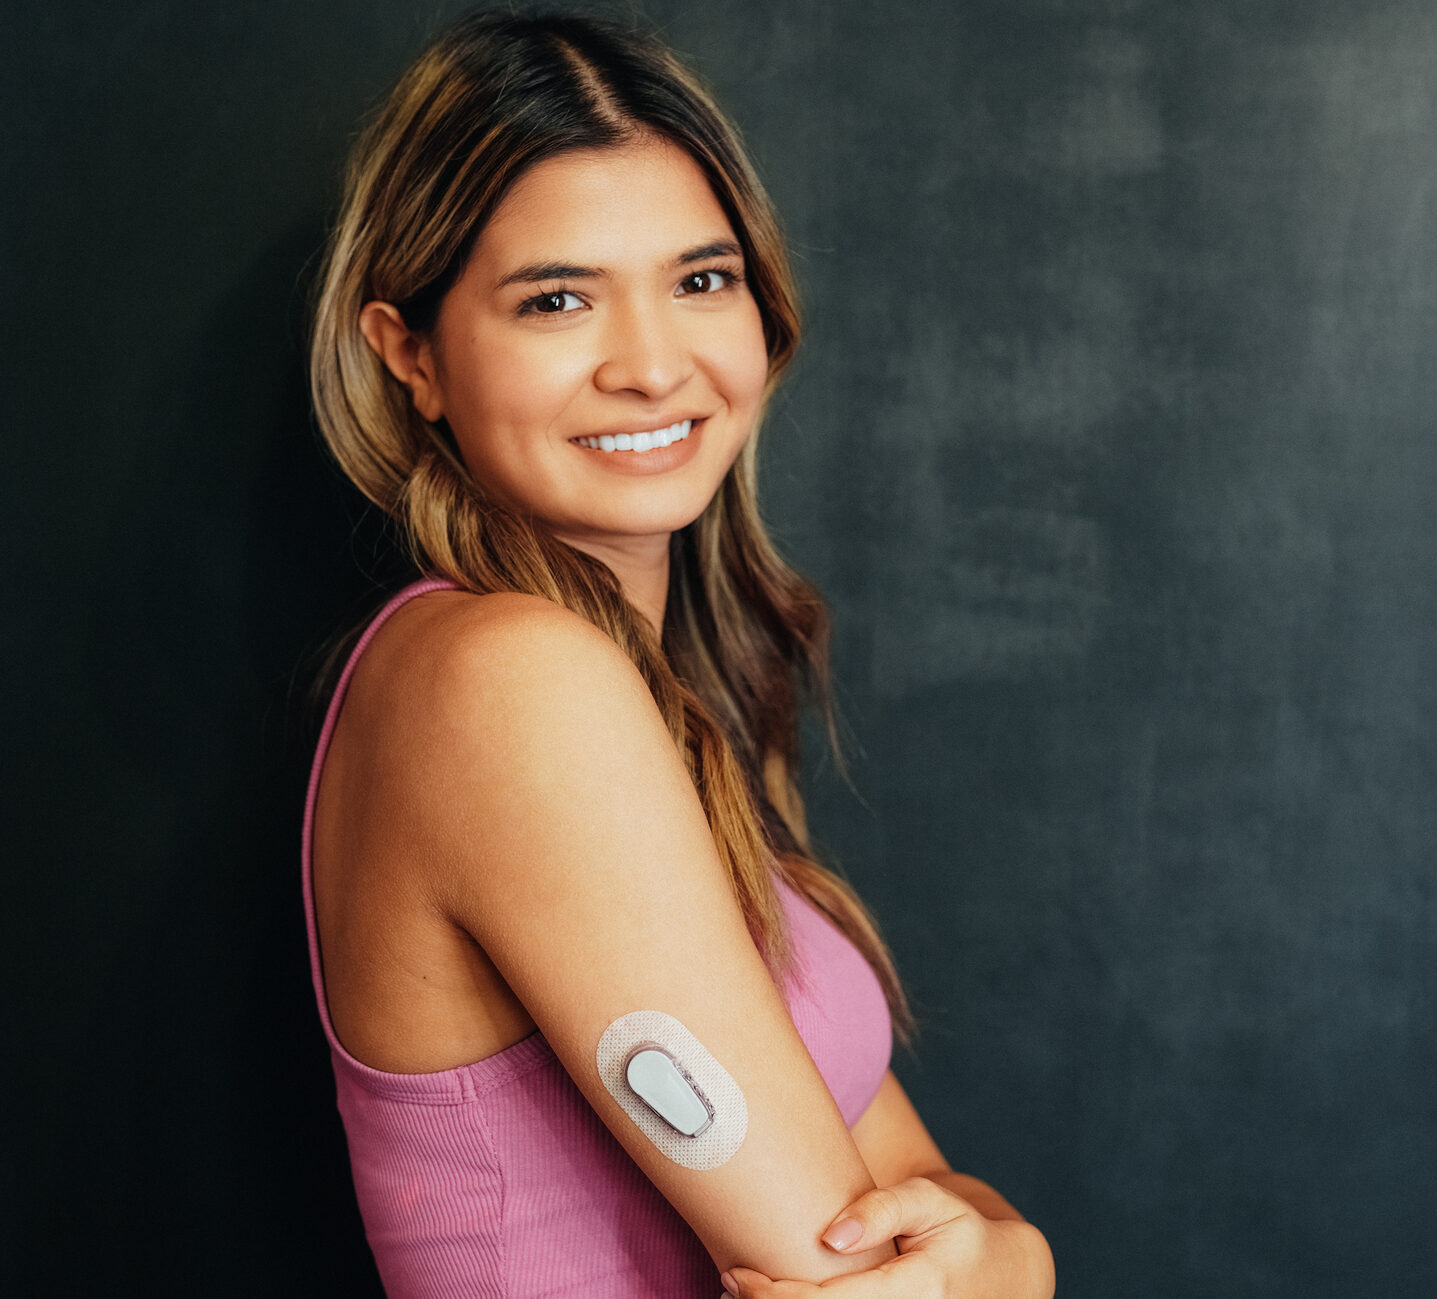 Woman with pink shirt with Dexcom G6 smiling